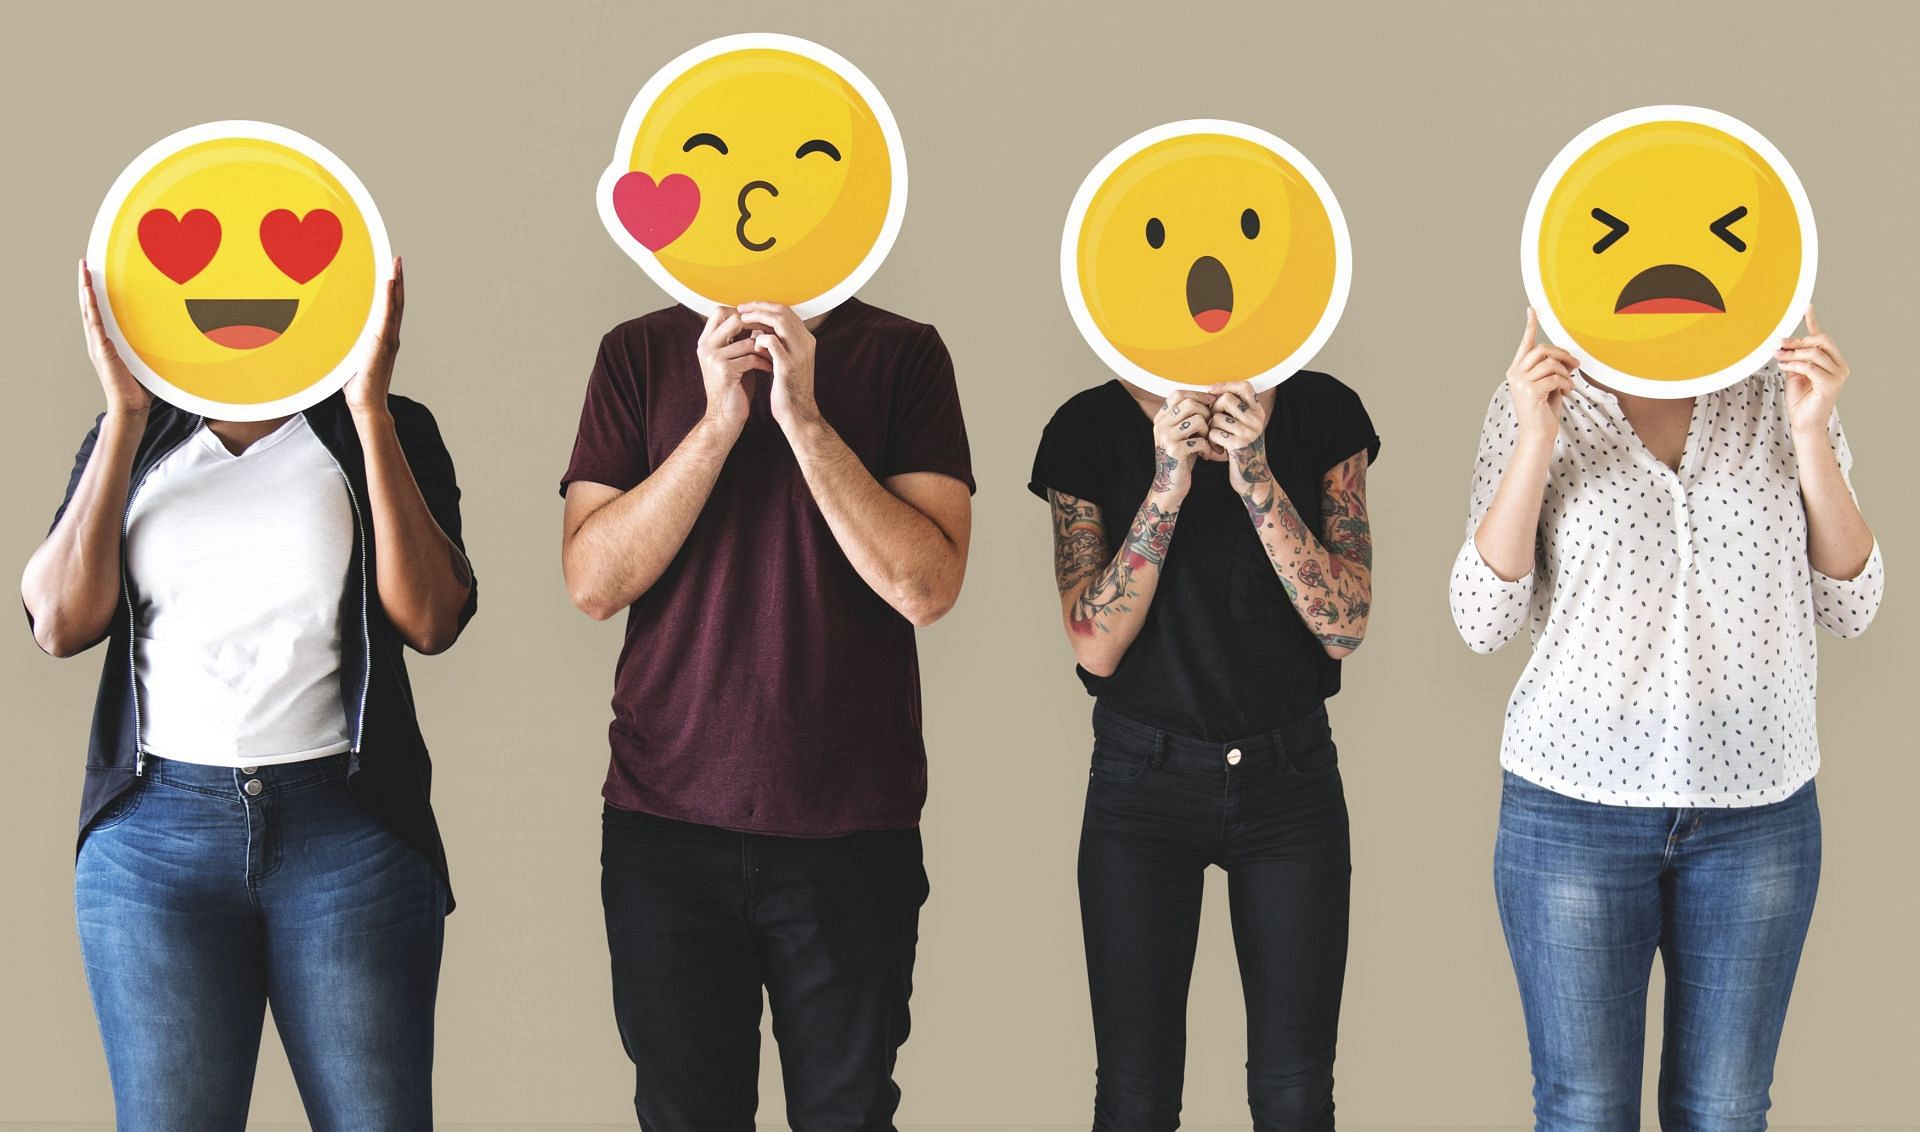 What makes us unique and special are these types of emotions. (Image via Rawpixel/ rawpixel)